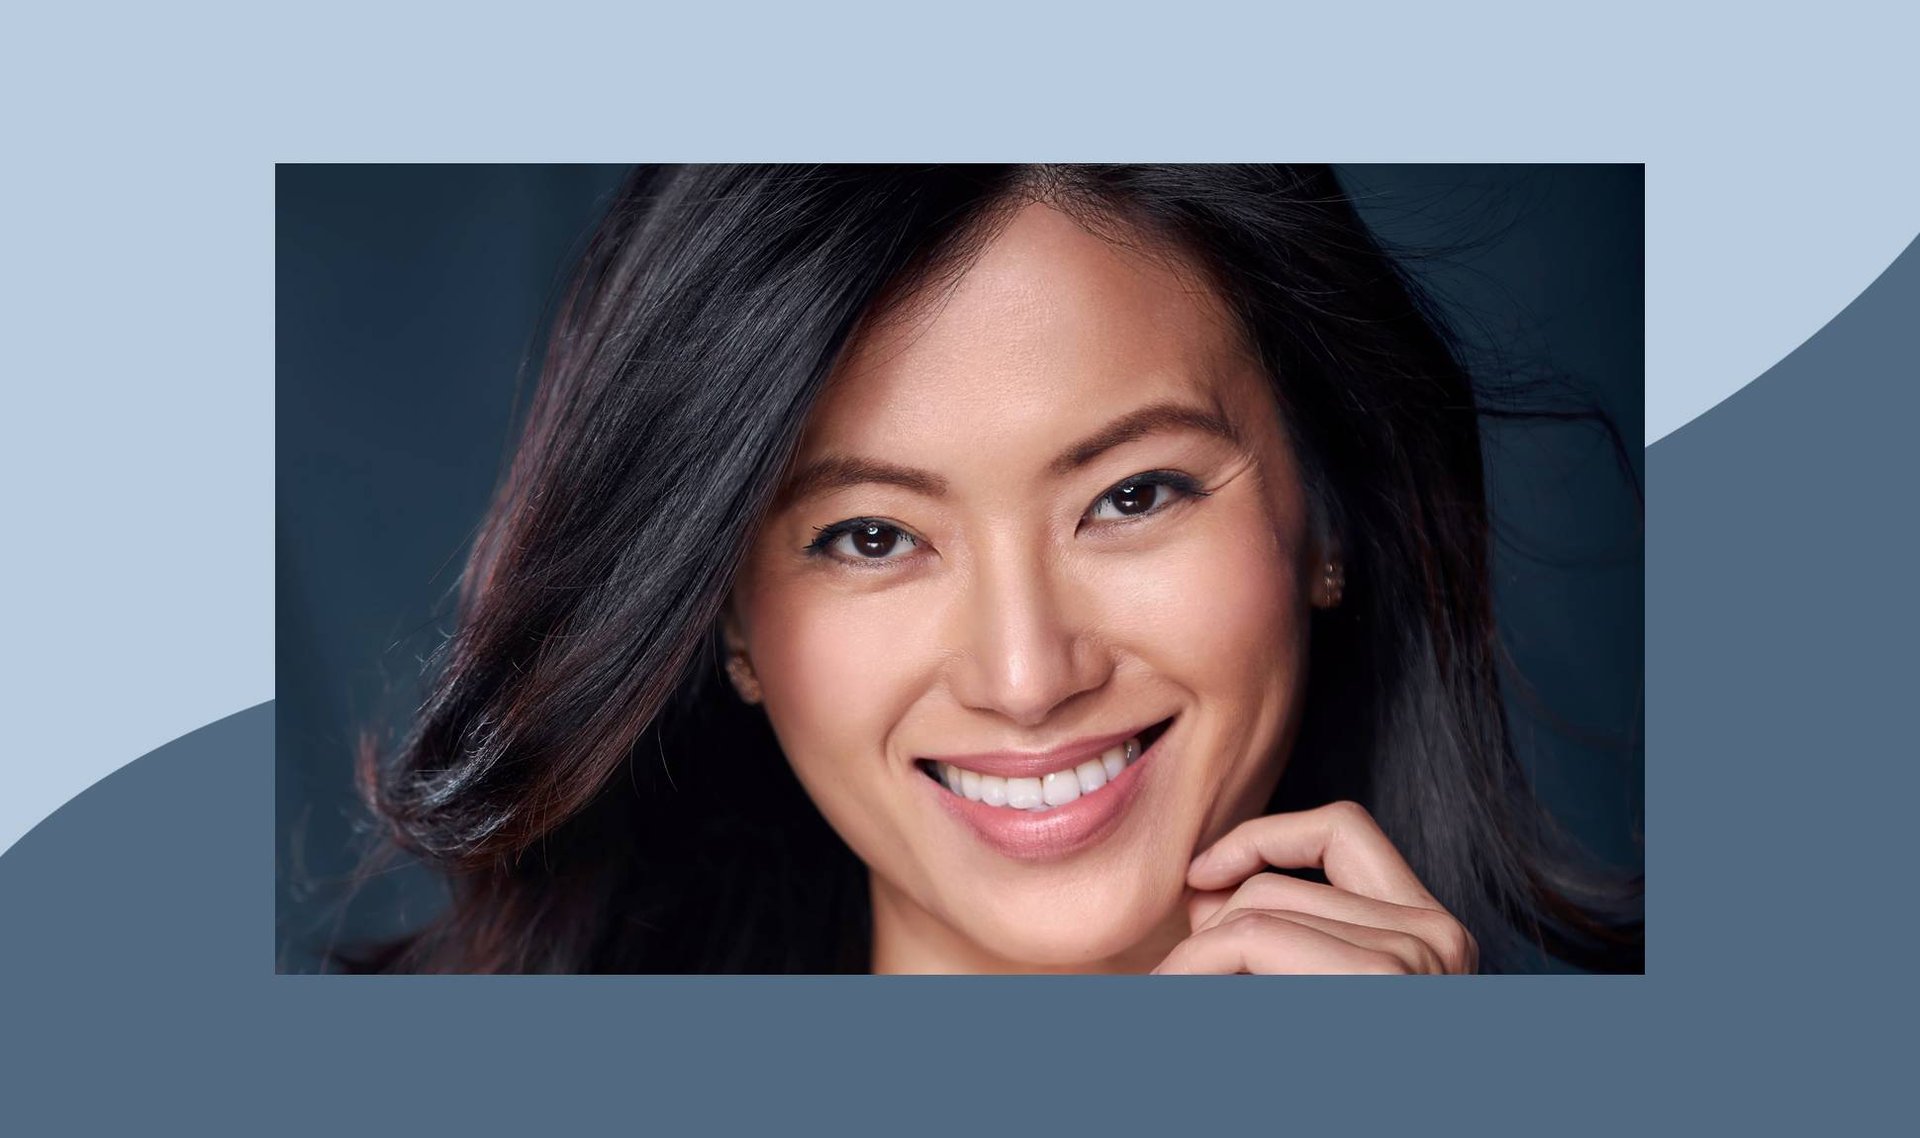 Jennifer Yen’s Job as a TV Actress Played a Big Role in the Creation of Her Skin-Care Brands 